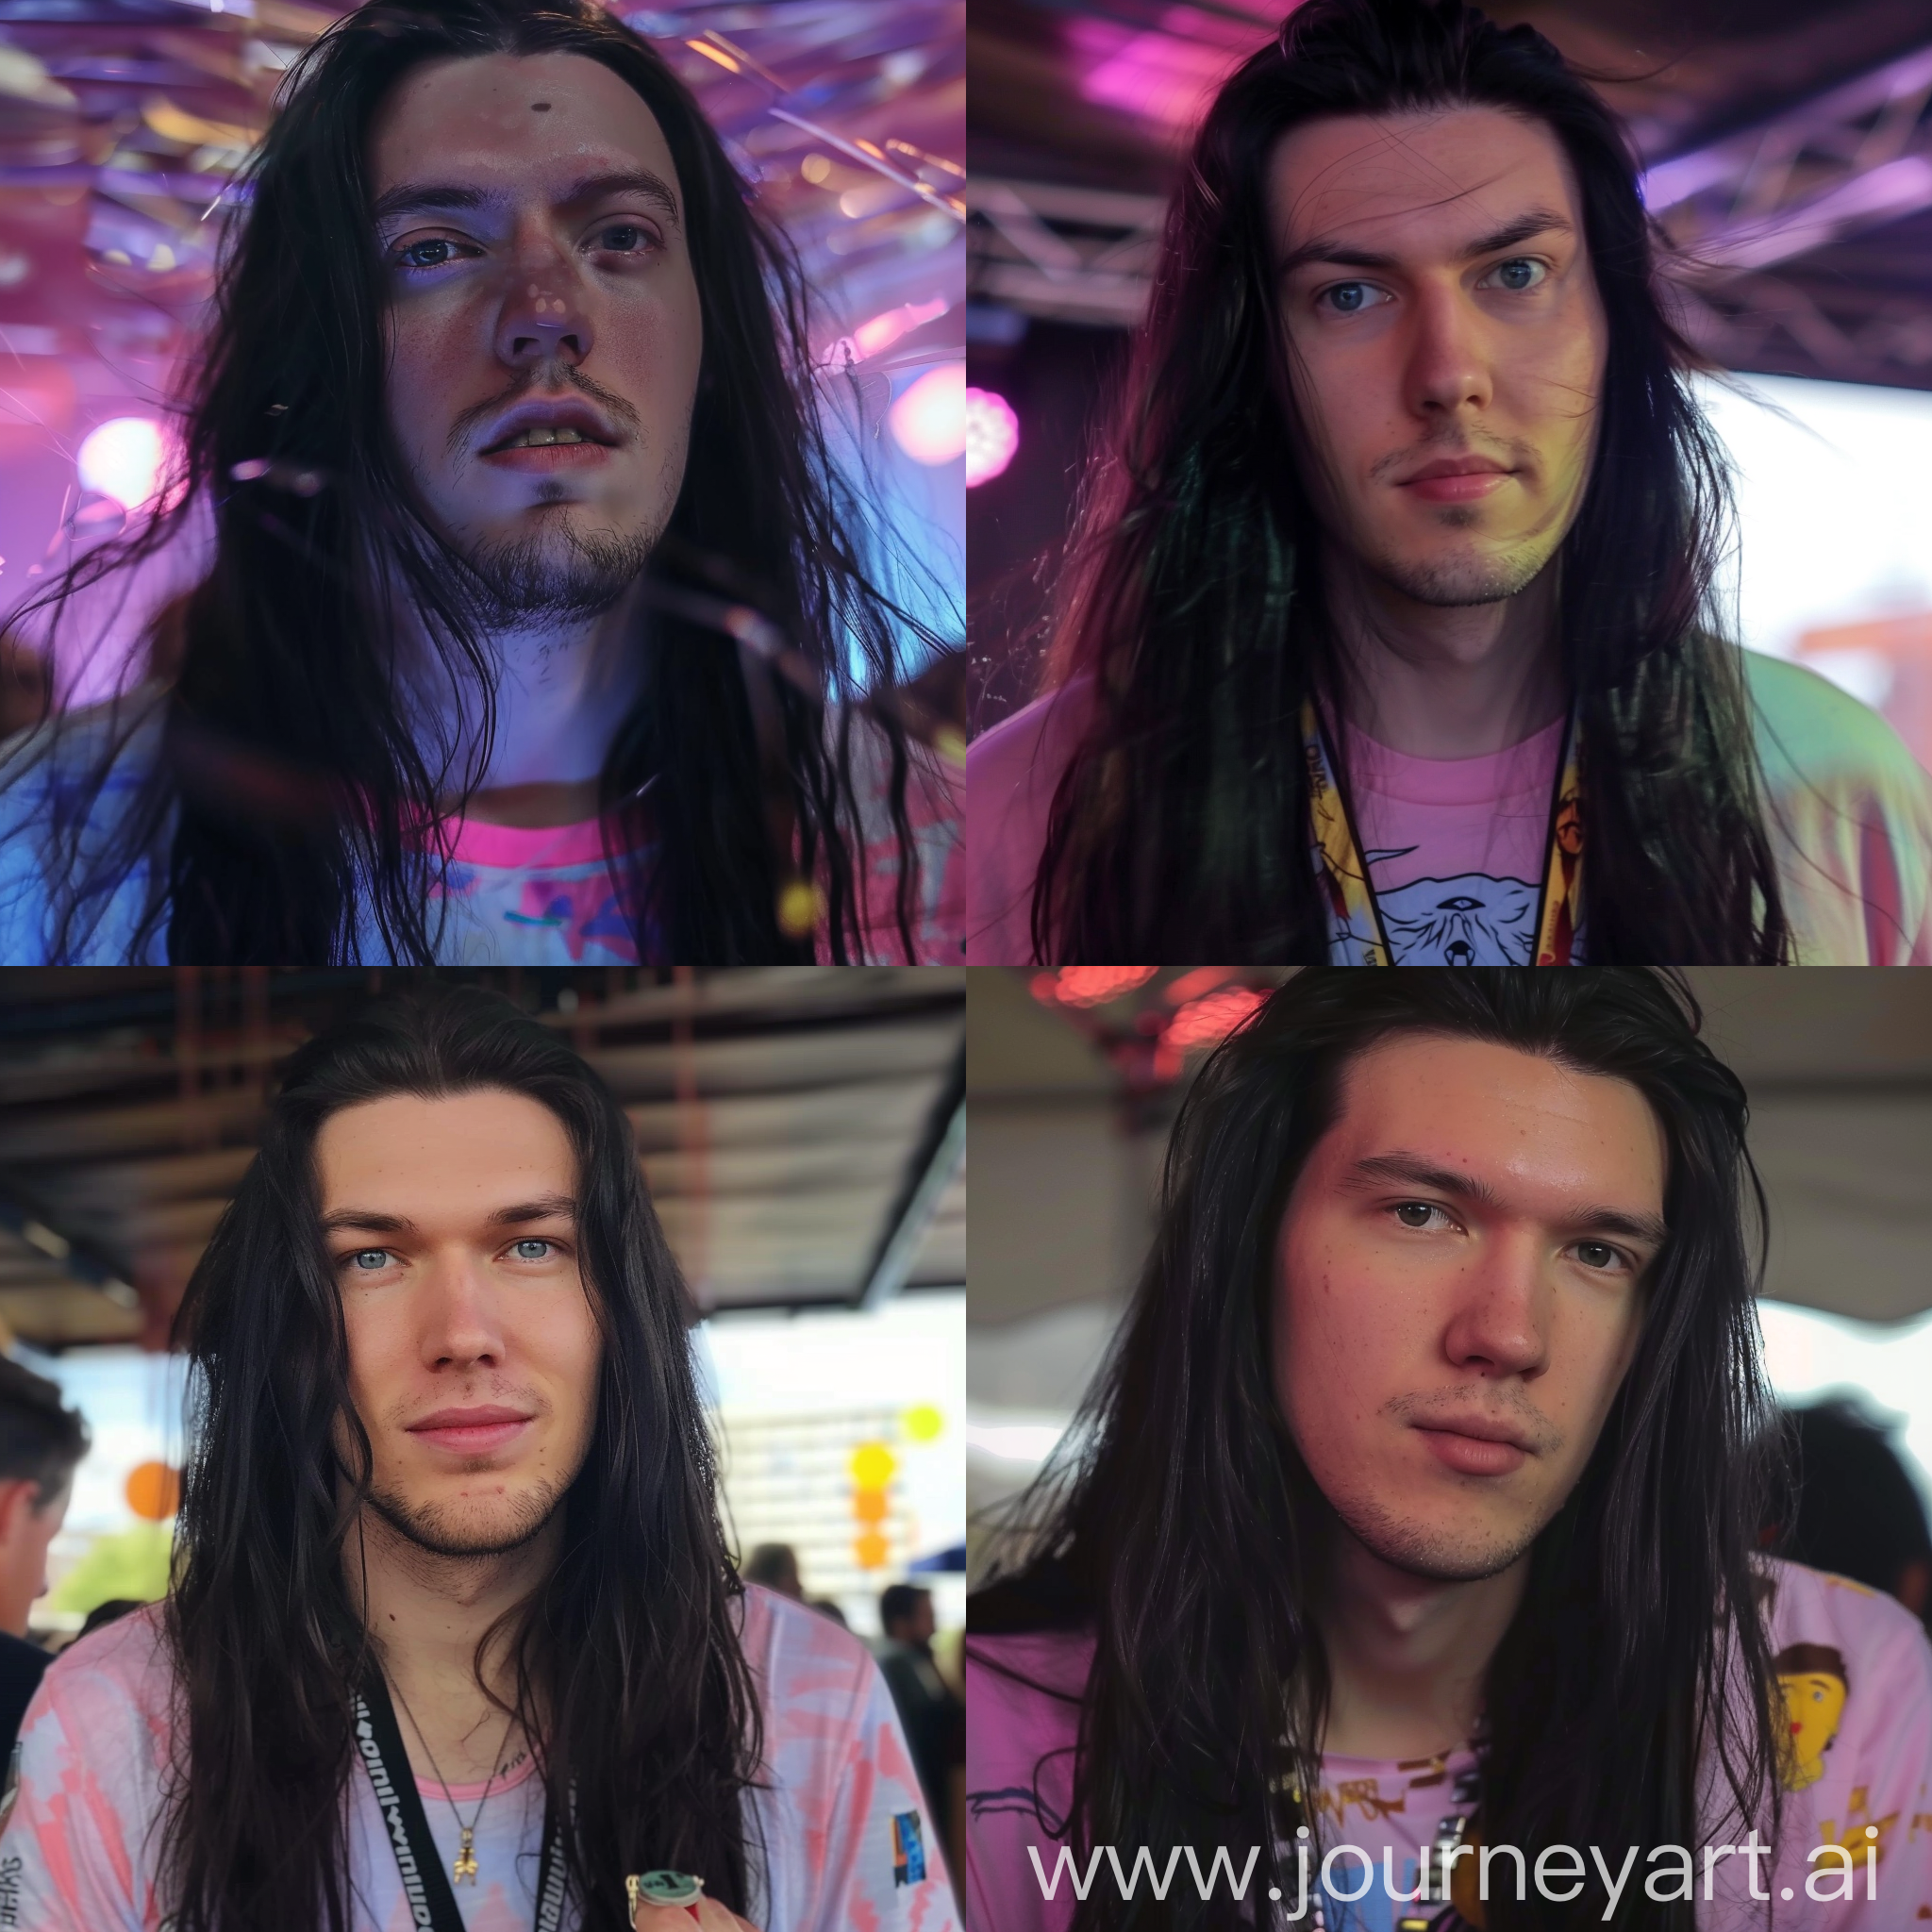 Slovak YouTuber FiFqo, with long black hair being a DJ, at an event, beach party, playing music, Dancing, pink shirt, cool lights, YouTuber, FiFqo, Filip Jánoš, use this picture of his face as sample: https://cdn.discordapp.com/attachments/828359970583216138/1226134617950781544/image.png?ex=6623a9d9&is=661134d9&hm=8e0699886e6a9b735ed10b358e7afb51e726b161103d56a9aba1cbcdc2d90628& make sure you preserve his face well, https://media.discordapp.net/attachments/828359970583216138/1226136106270068827/image.png?ex=6623ab3c&is=6611363c&hm=5ae9be4702e999f9681915da9e76a7c25f0043a5b9df1ad908a6dcef544335e3&=&format=webp&quality=lossless&width=413&height=437